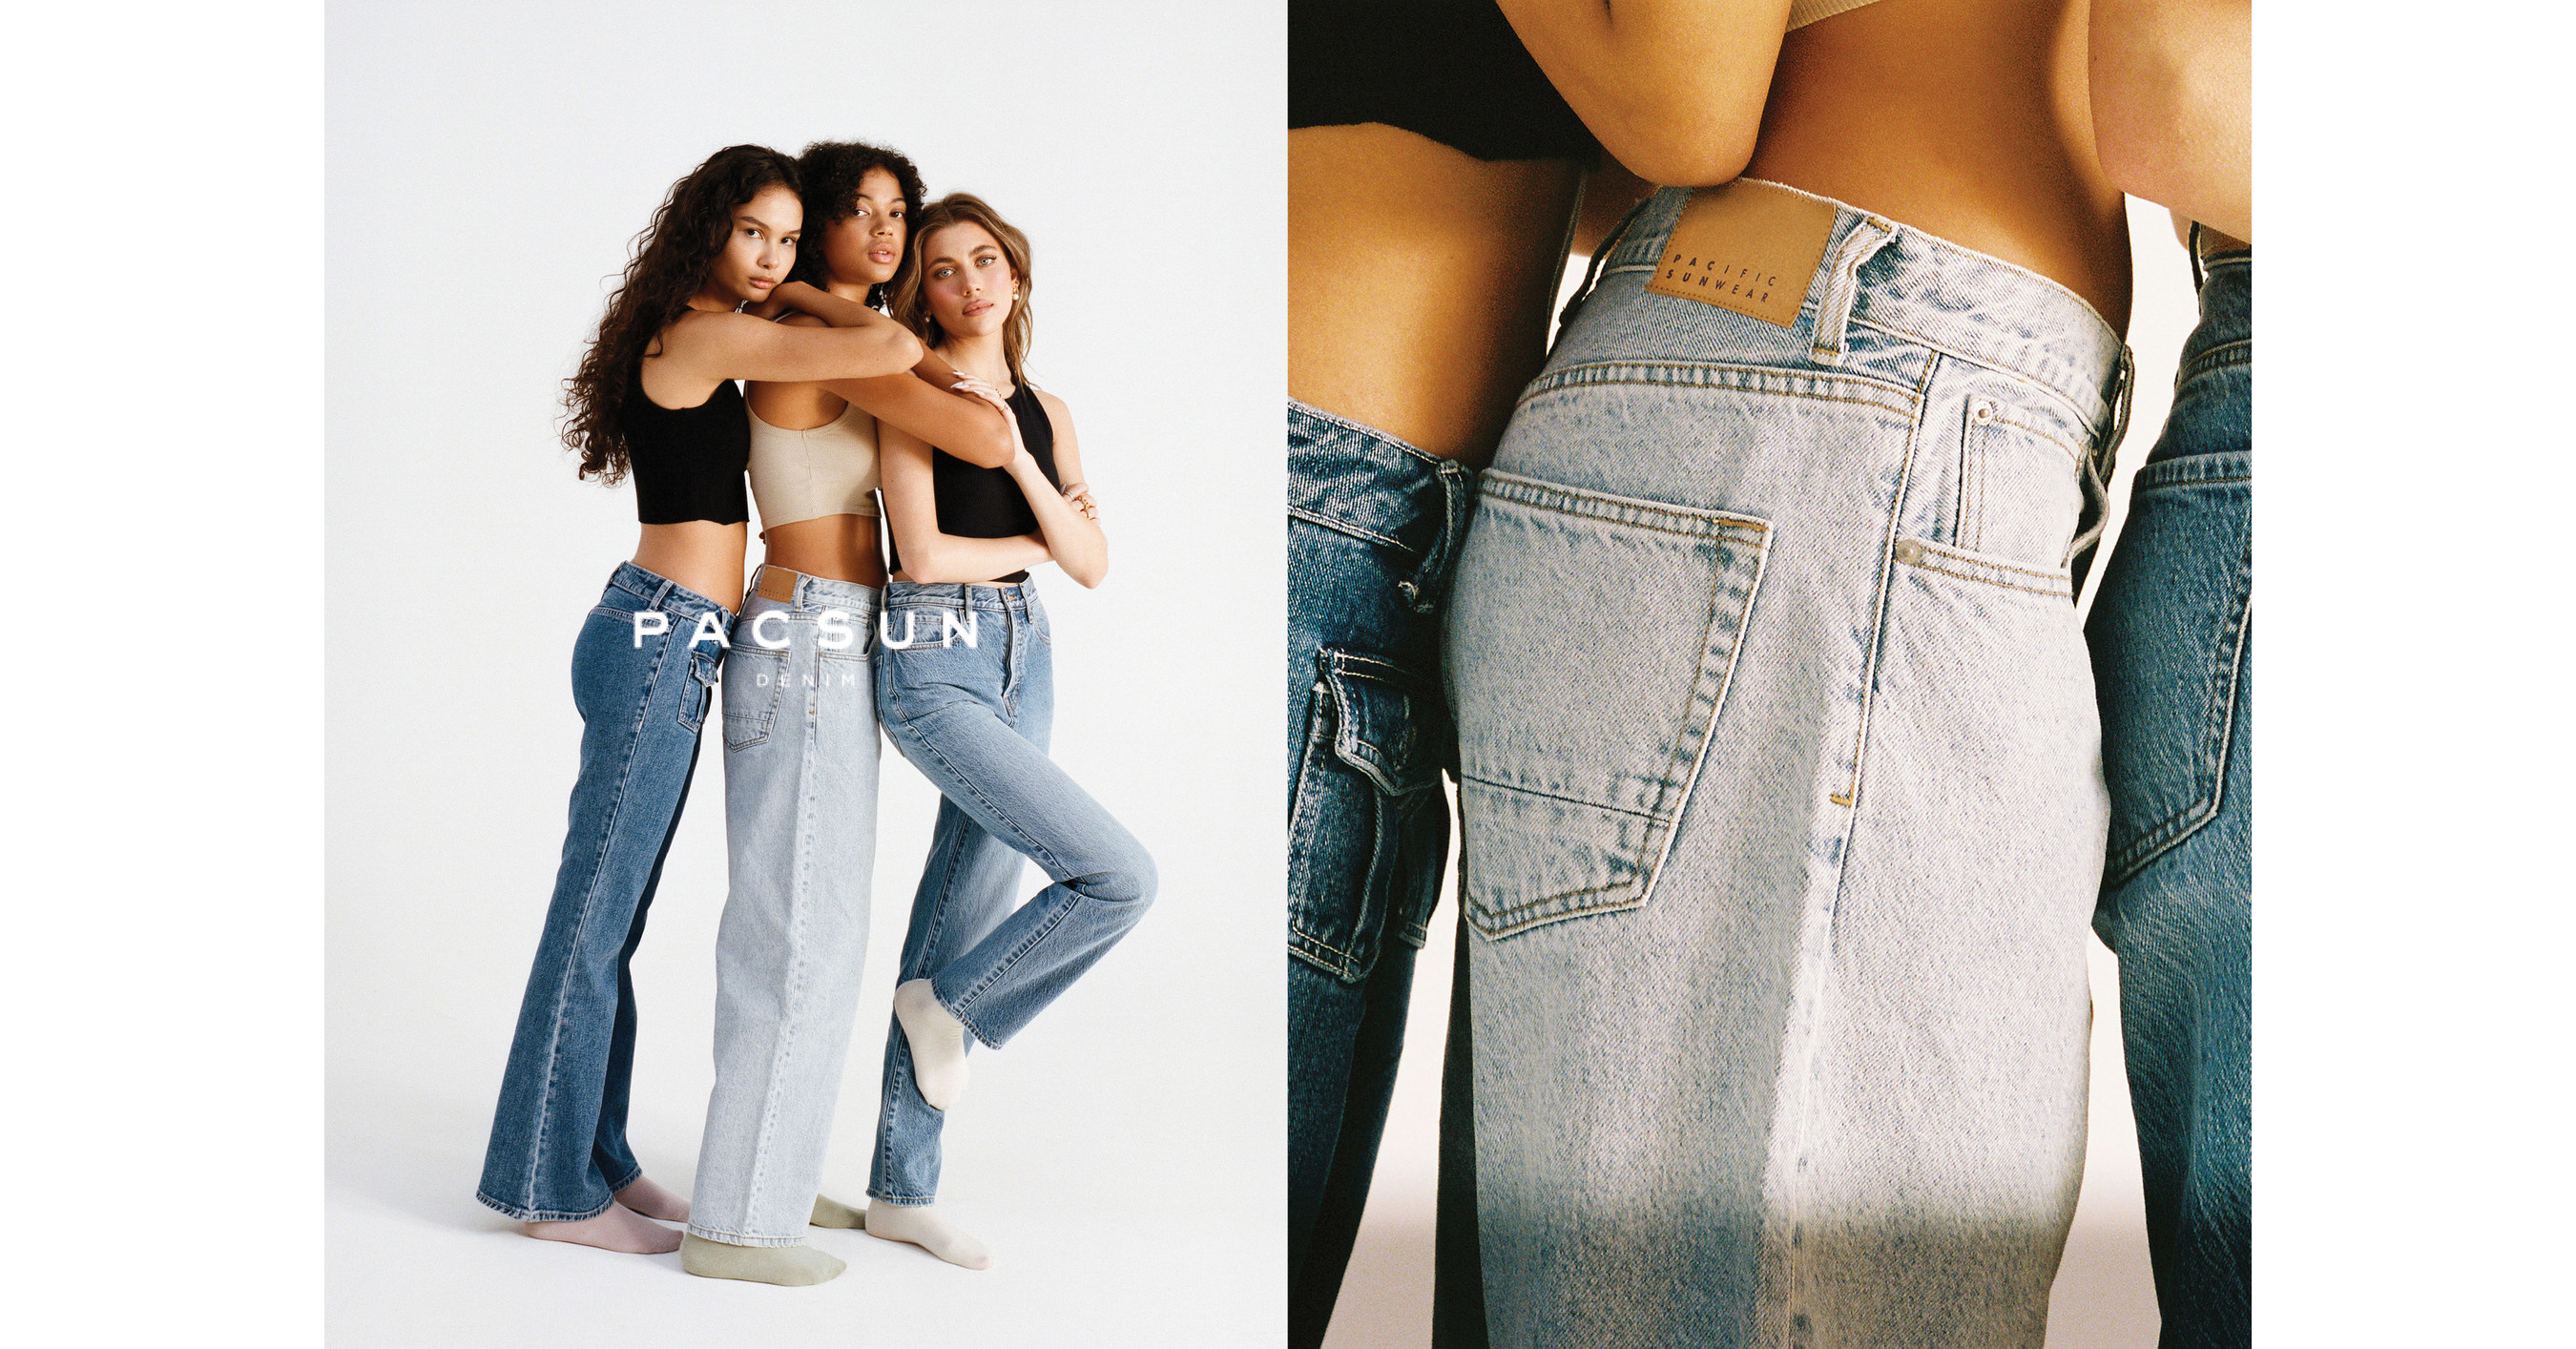 PacSun Brown High Waisted Bootcut Jeans